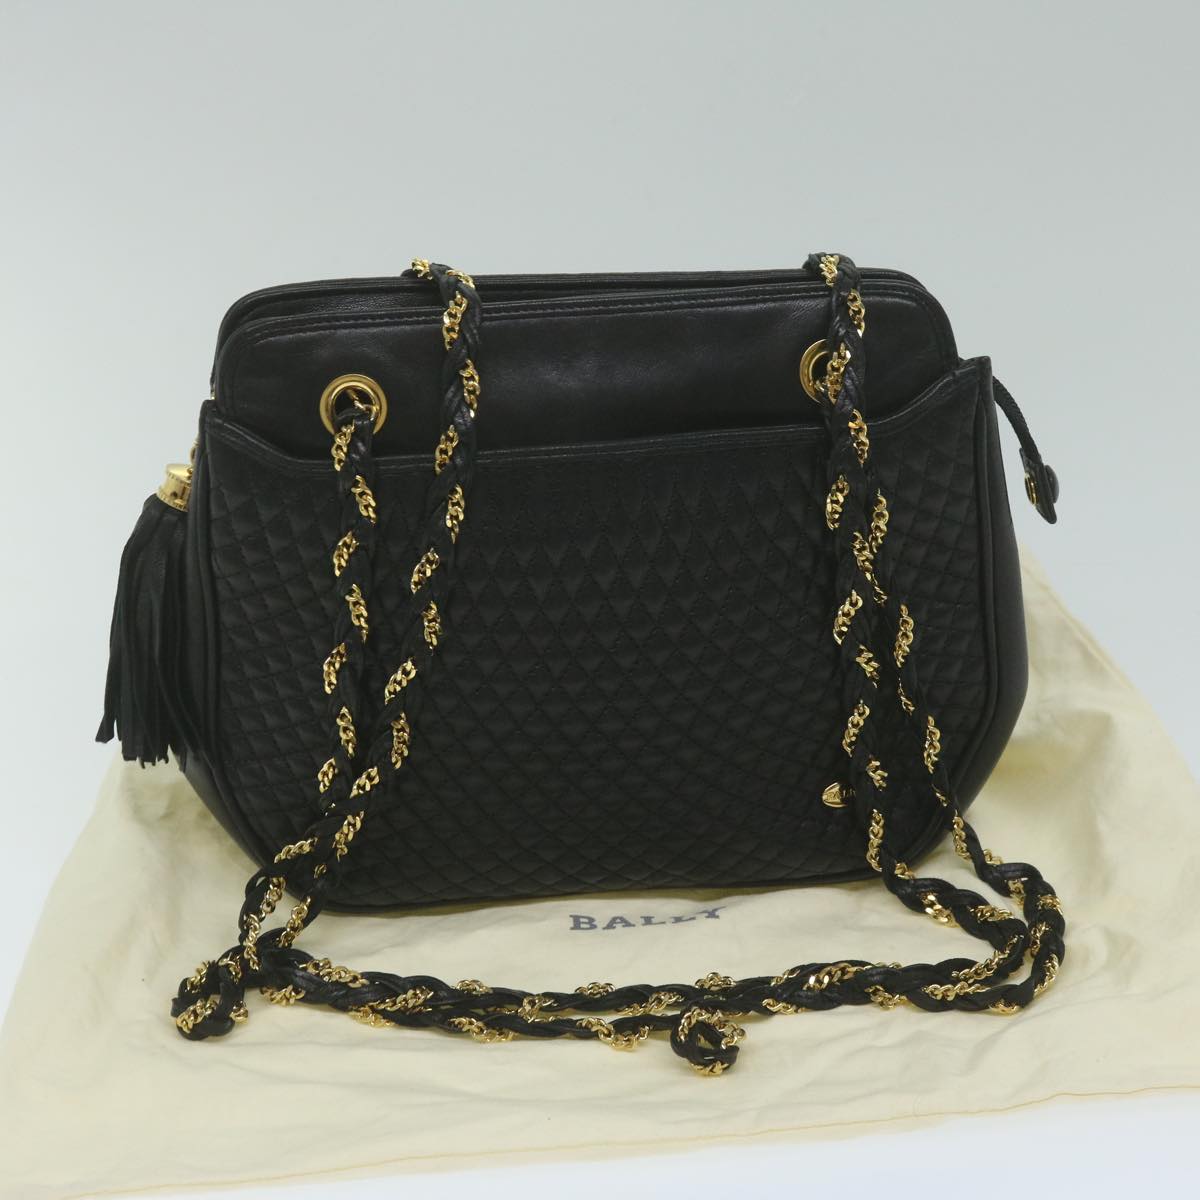 BALLY Quilted Chain Shoulder Bag Leather Black Auth yb484